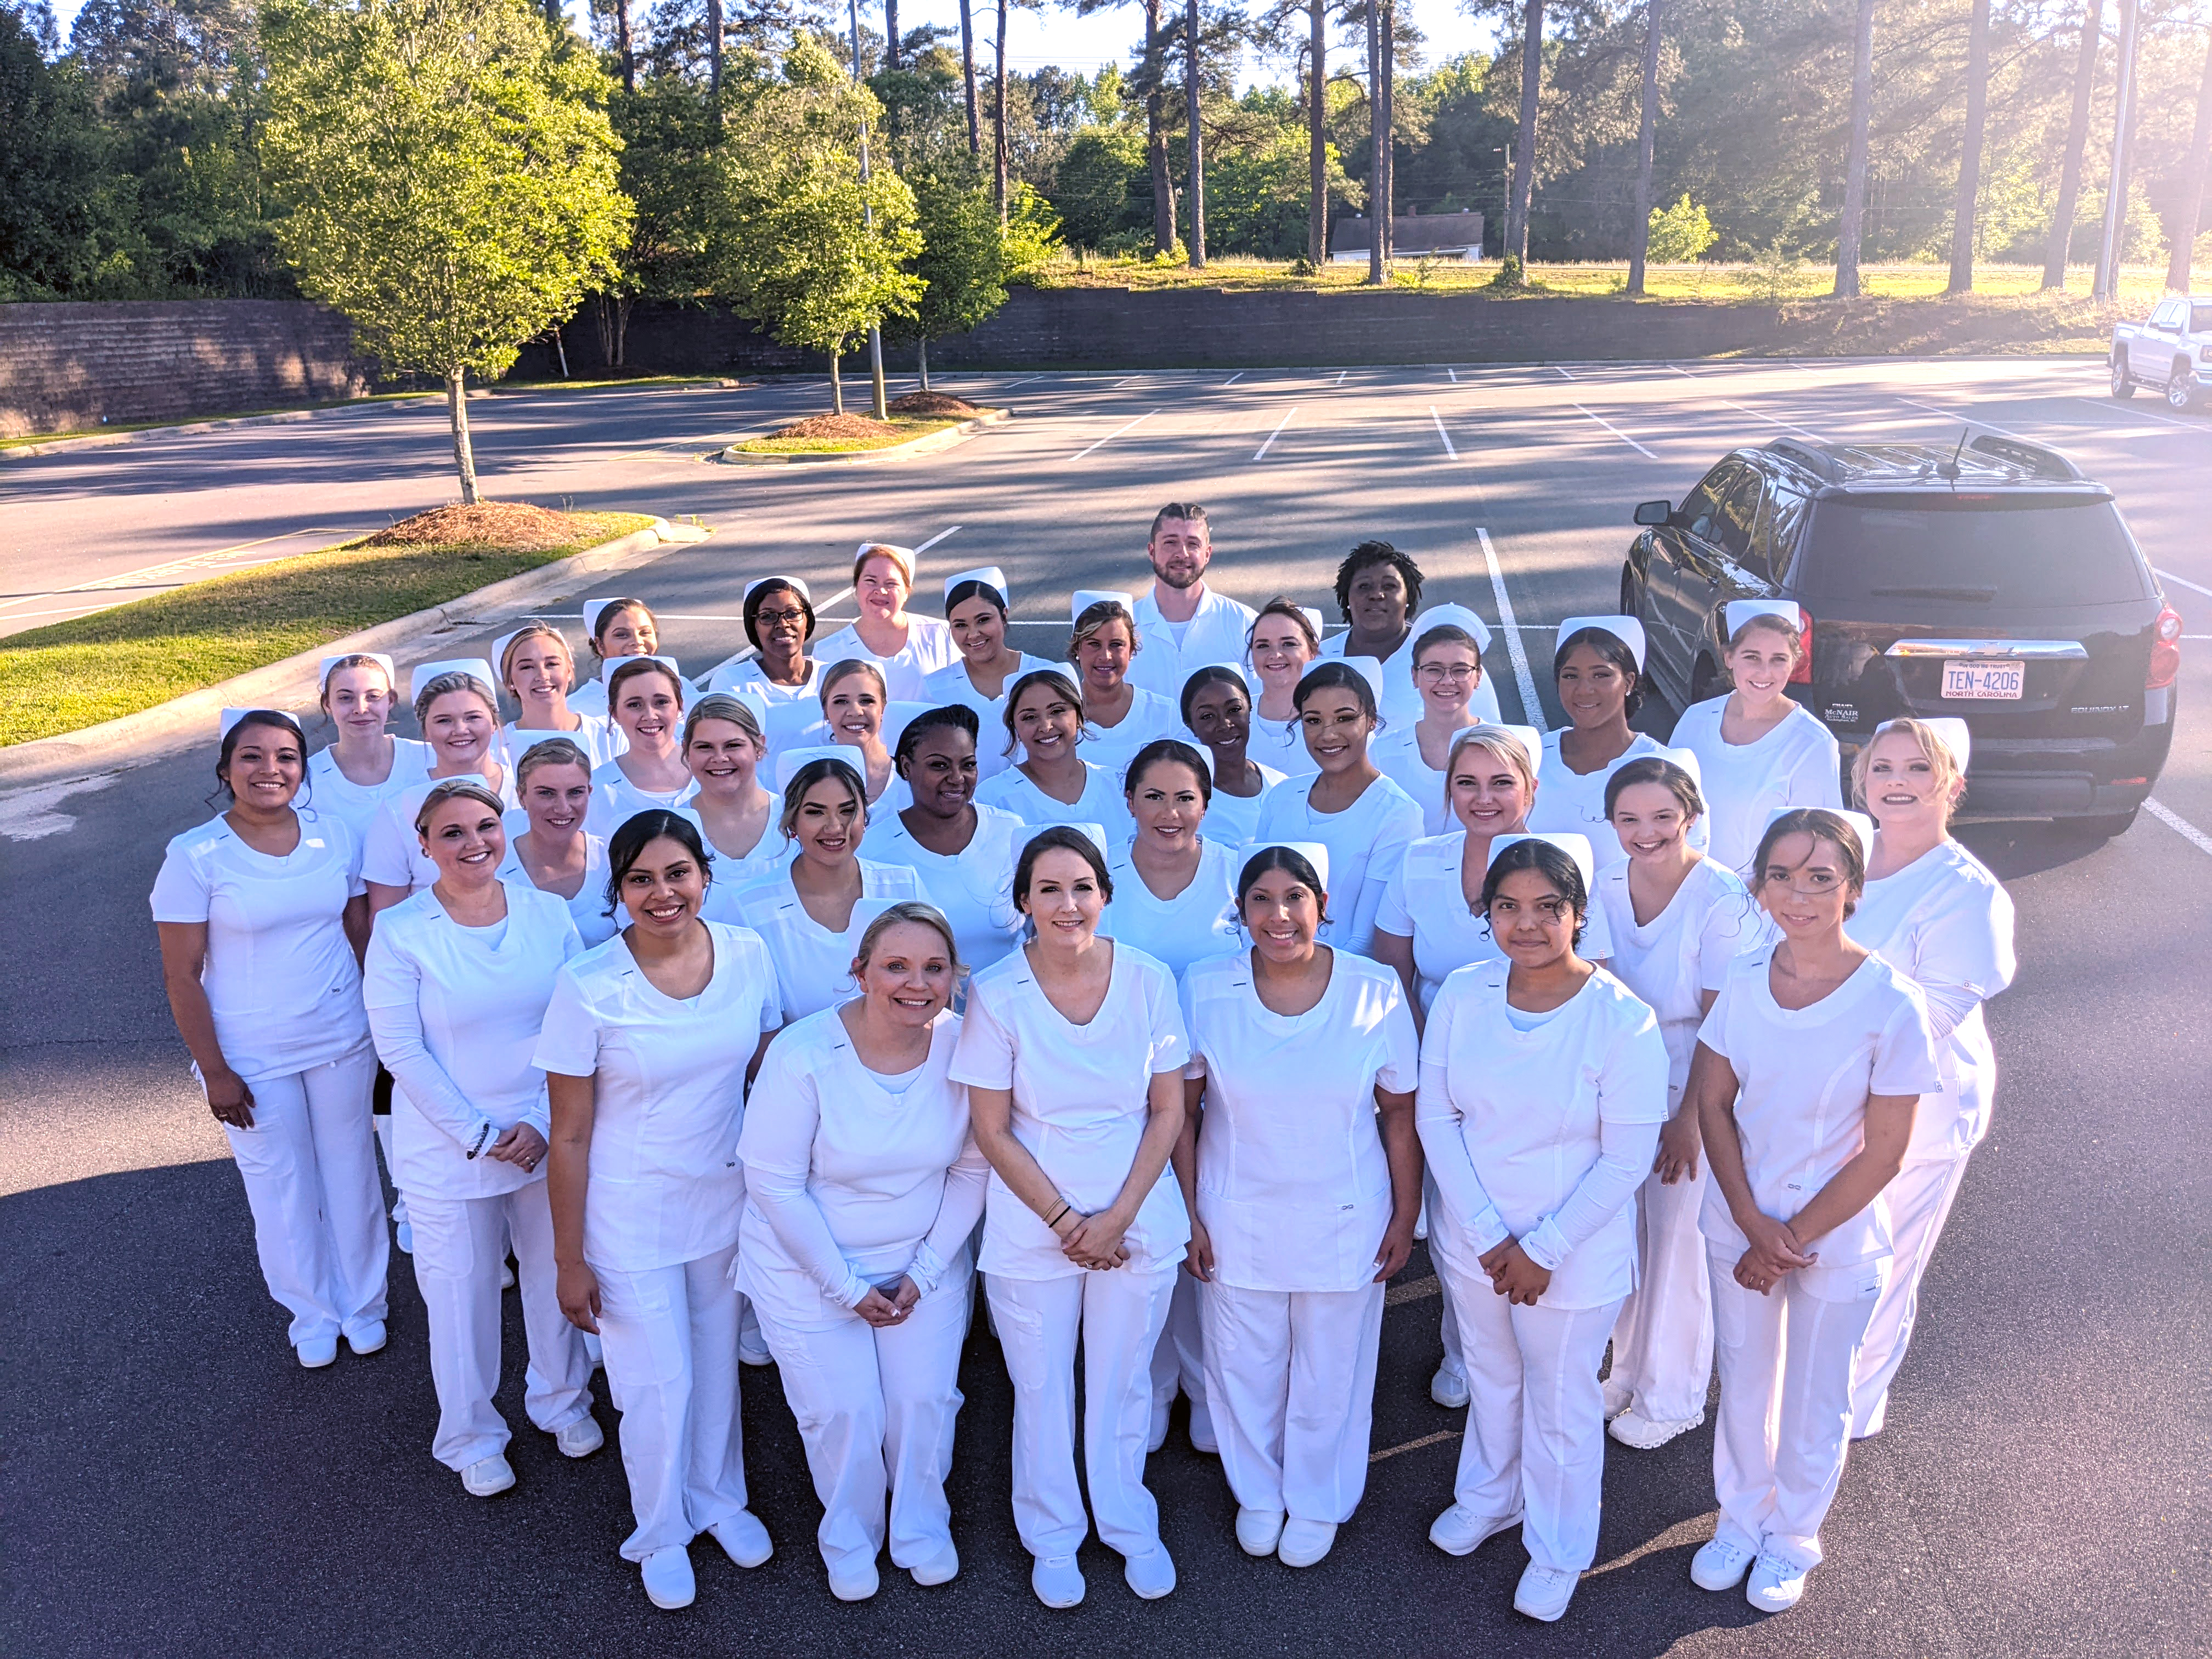 The nursing students pose for a group photo